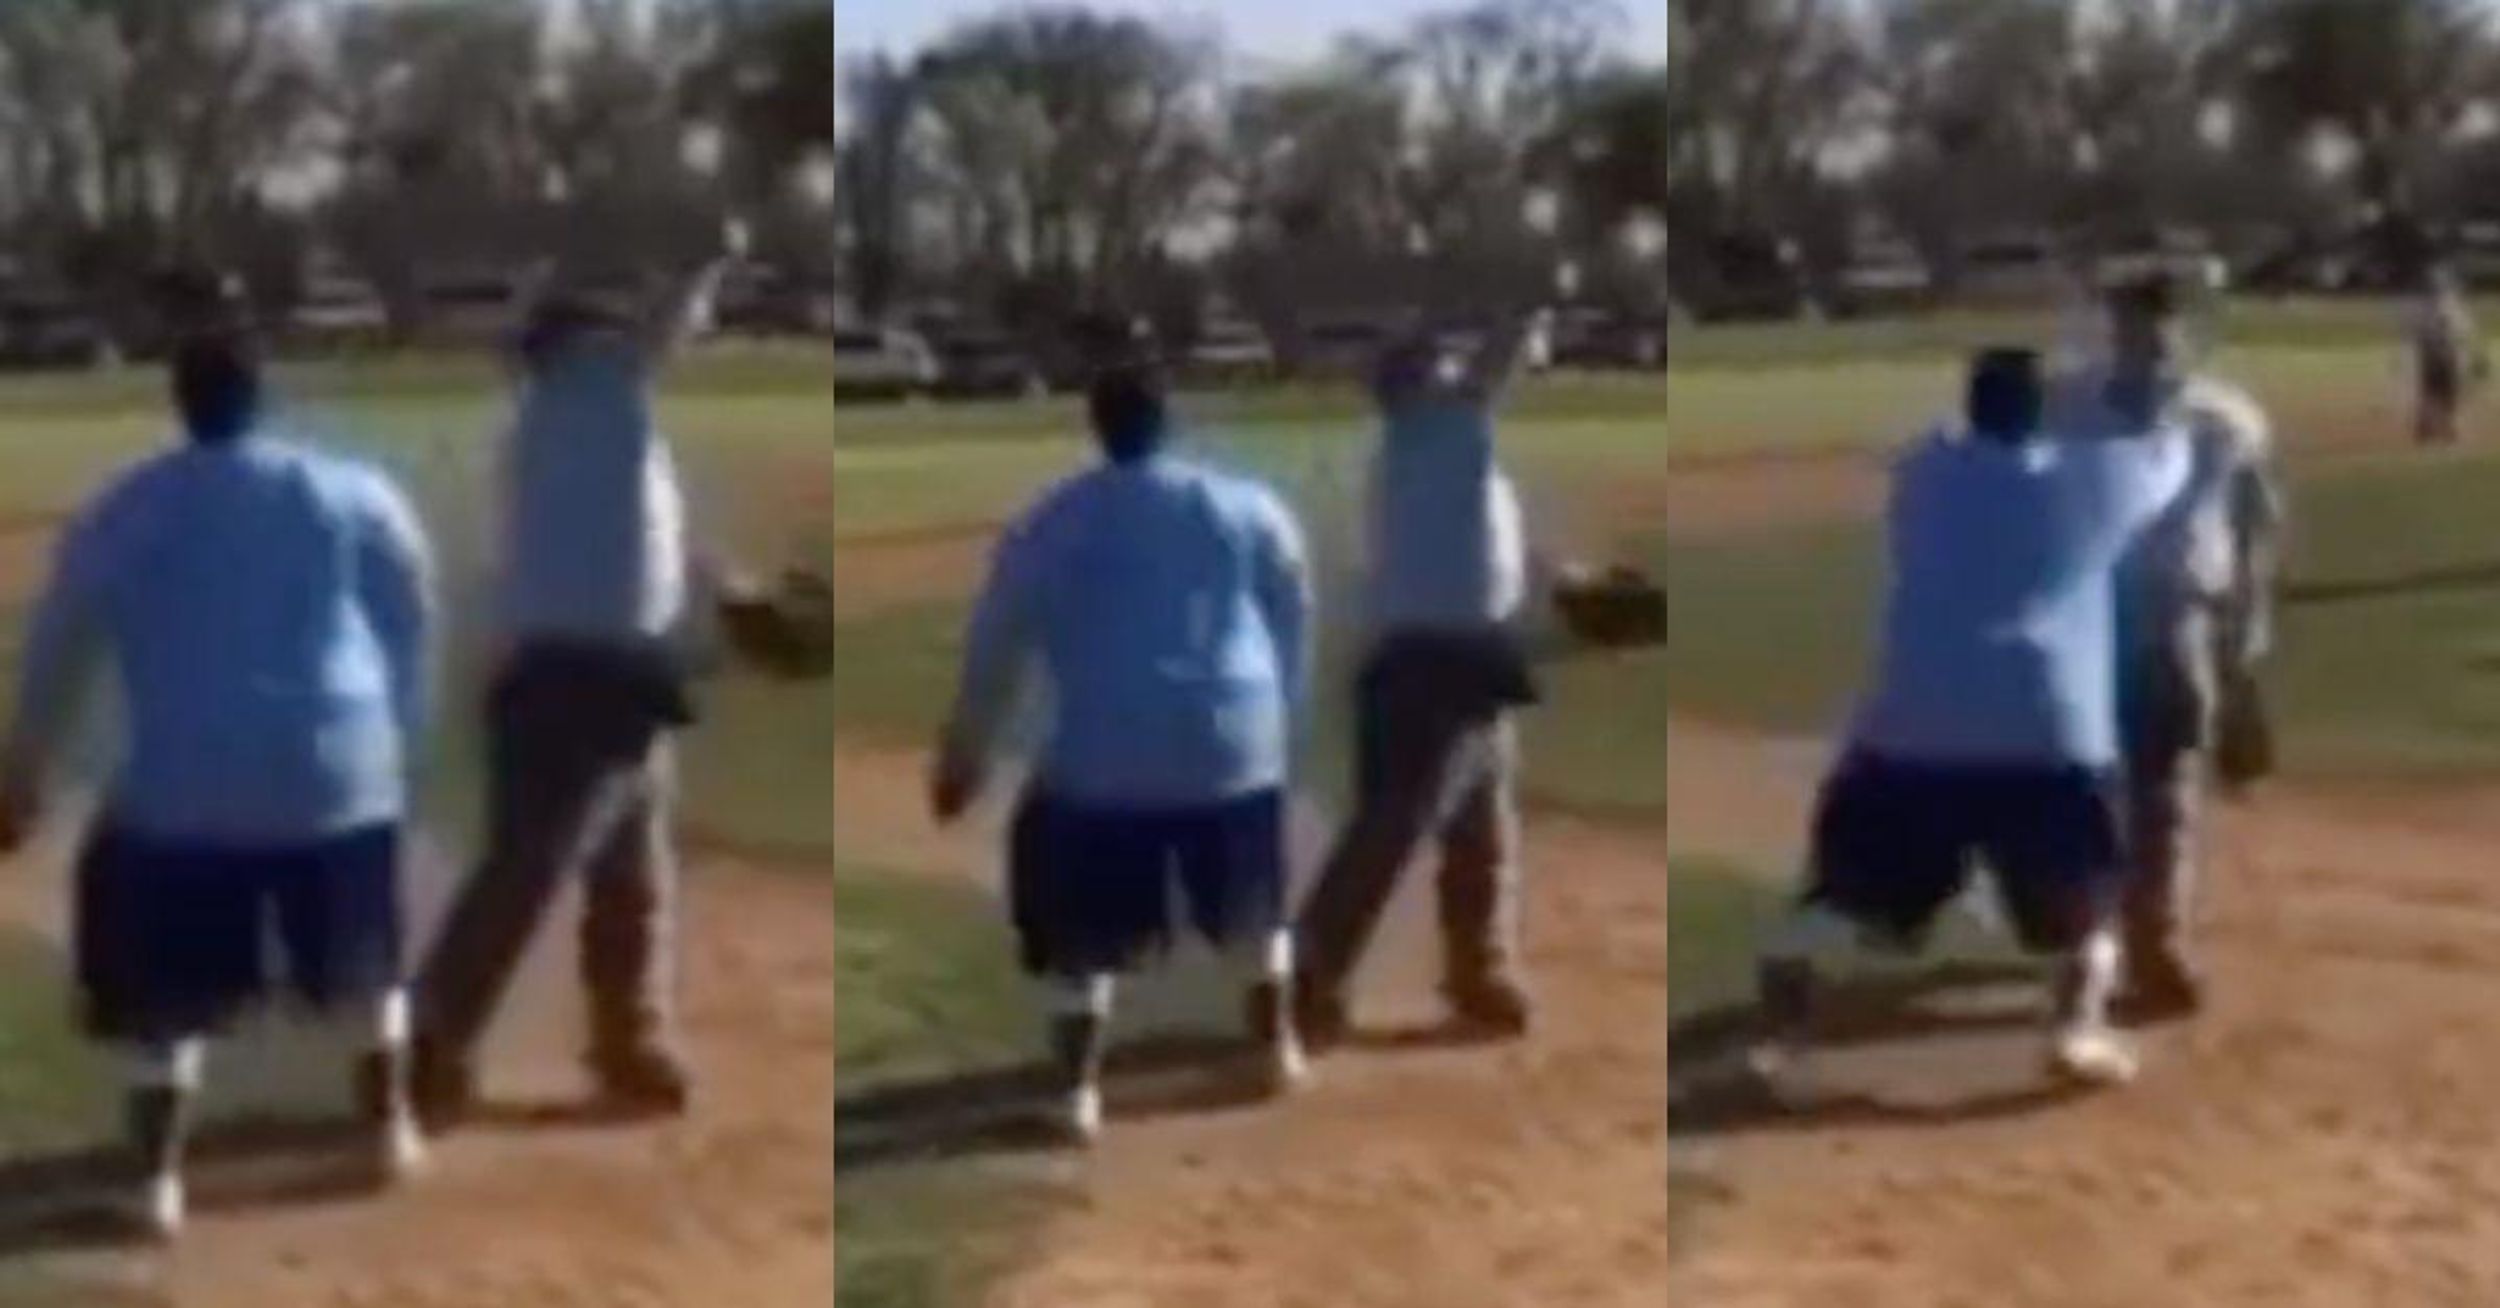 Youth Baseball Umpire Has To Be Taken Away On Stretcher After Coach Shoves Him To Ground Over Call